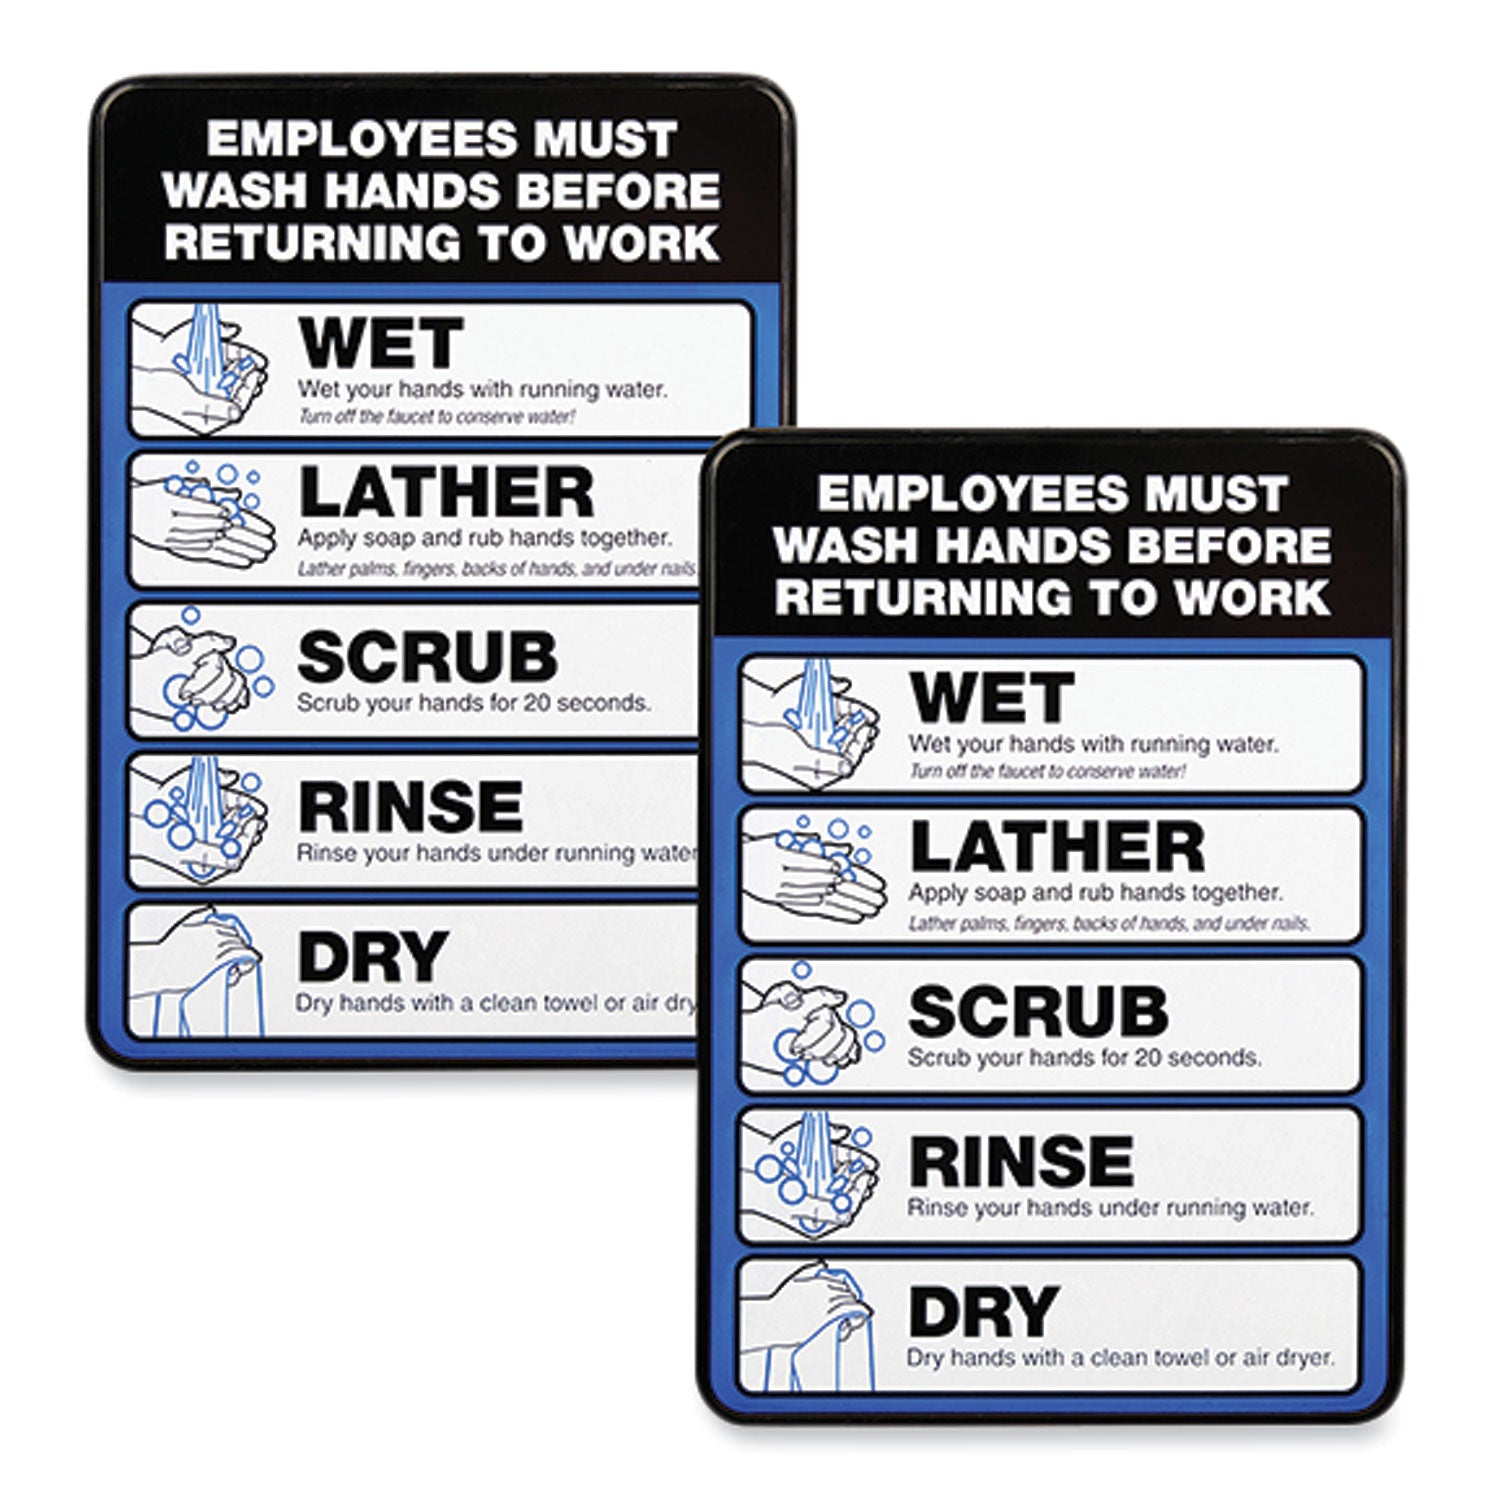 employees-must-wash-hands-indoor-wall-sign-5-x-7-black-blue-white-face-black-blue-graphics-2-pack_exohd0171s - 1